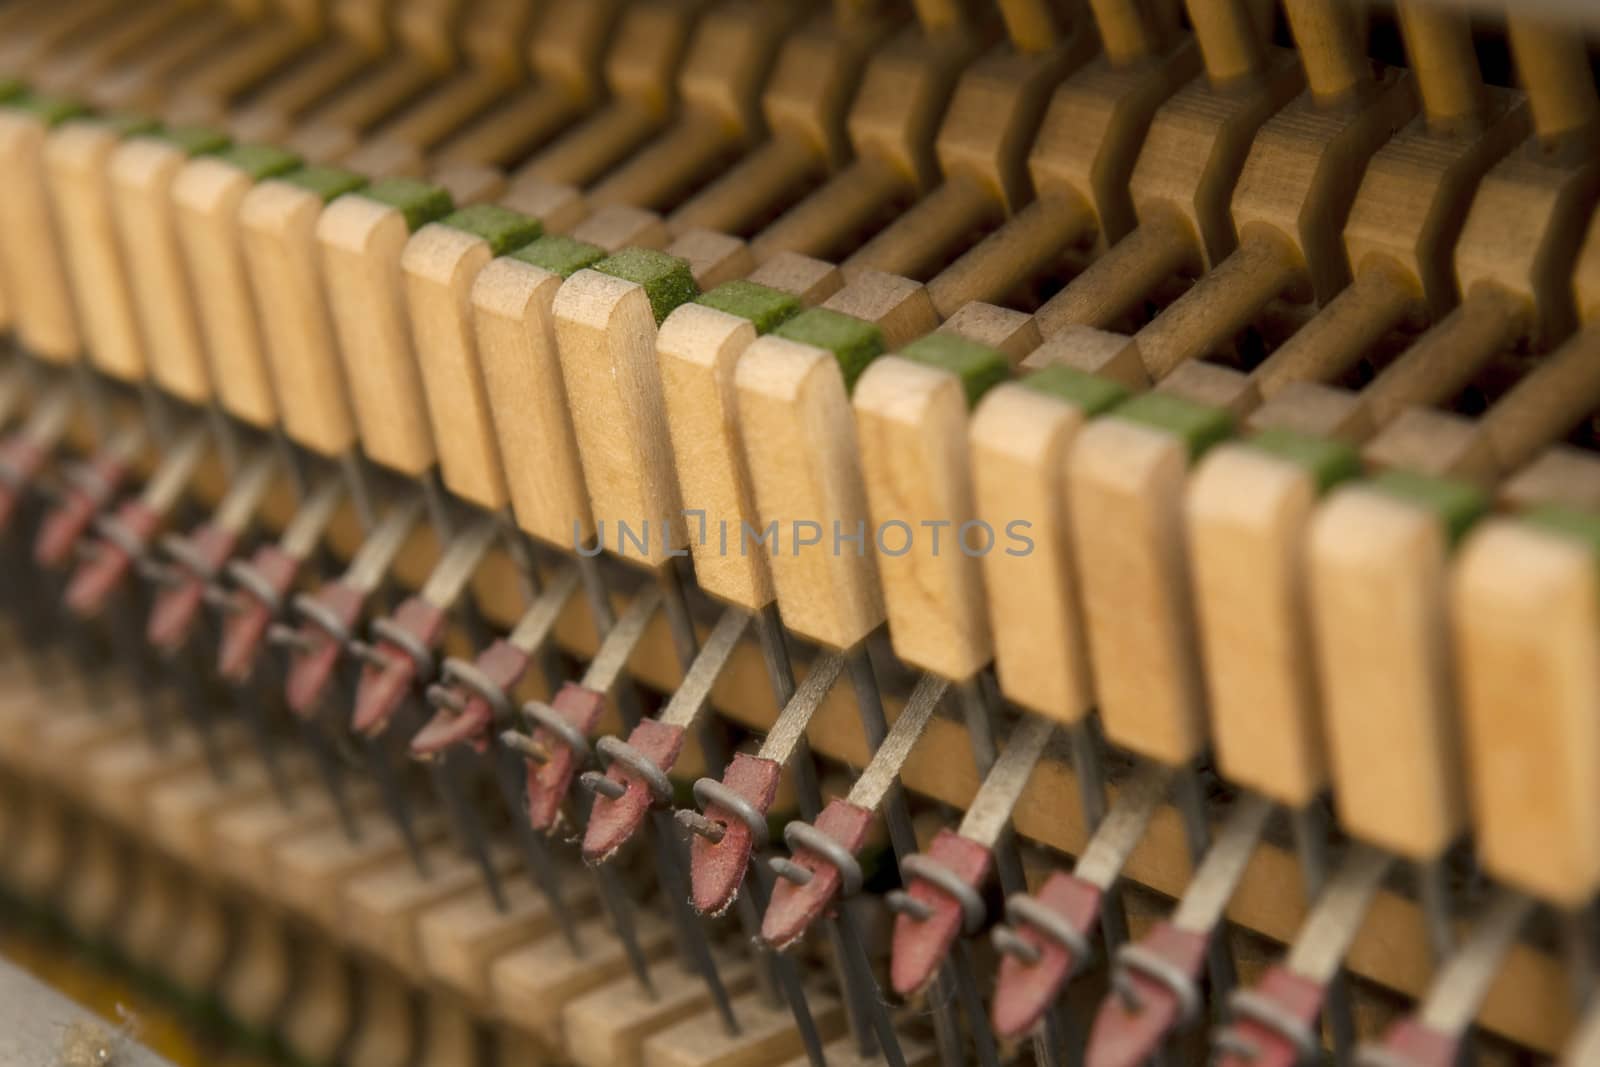 Detail shot of an old piano's hammers and inside works